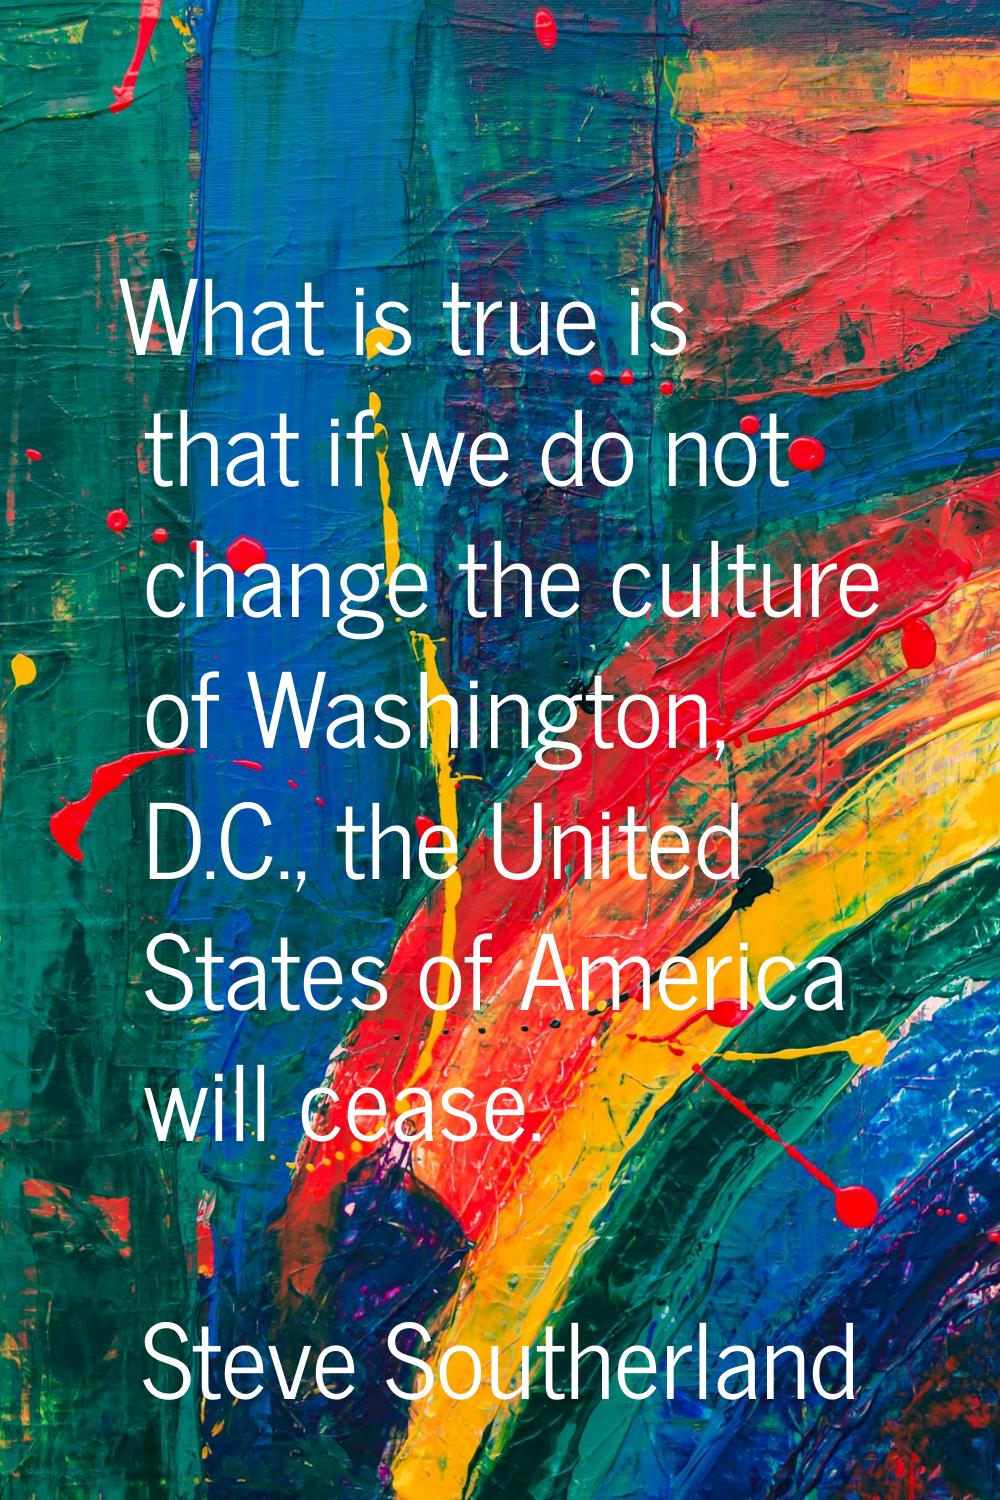 What is true is that if we do not change the culture of Washington, D.C., the United States of Amer